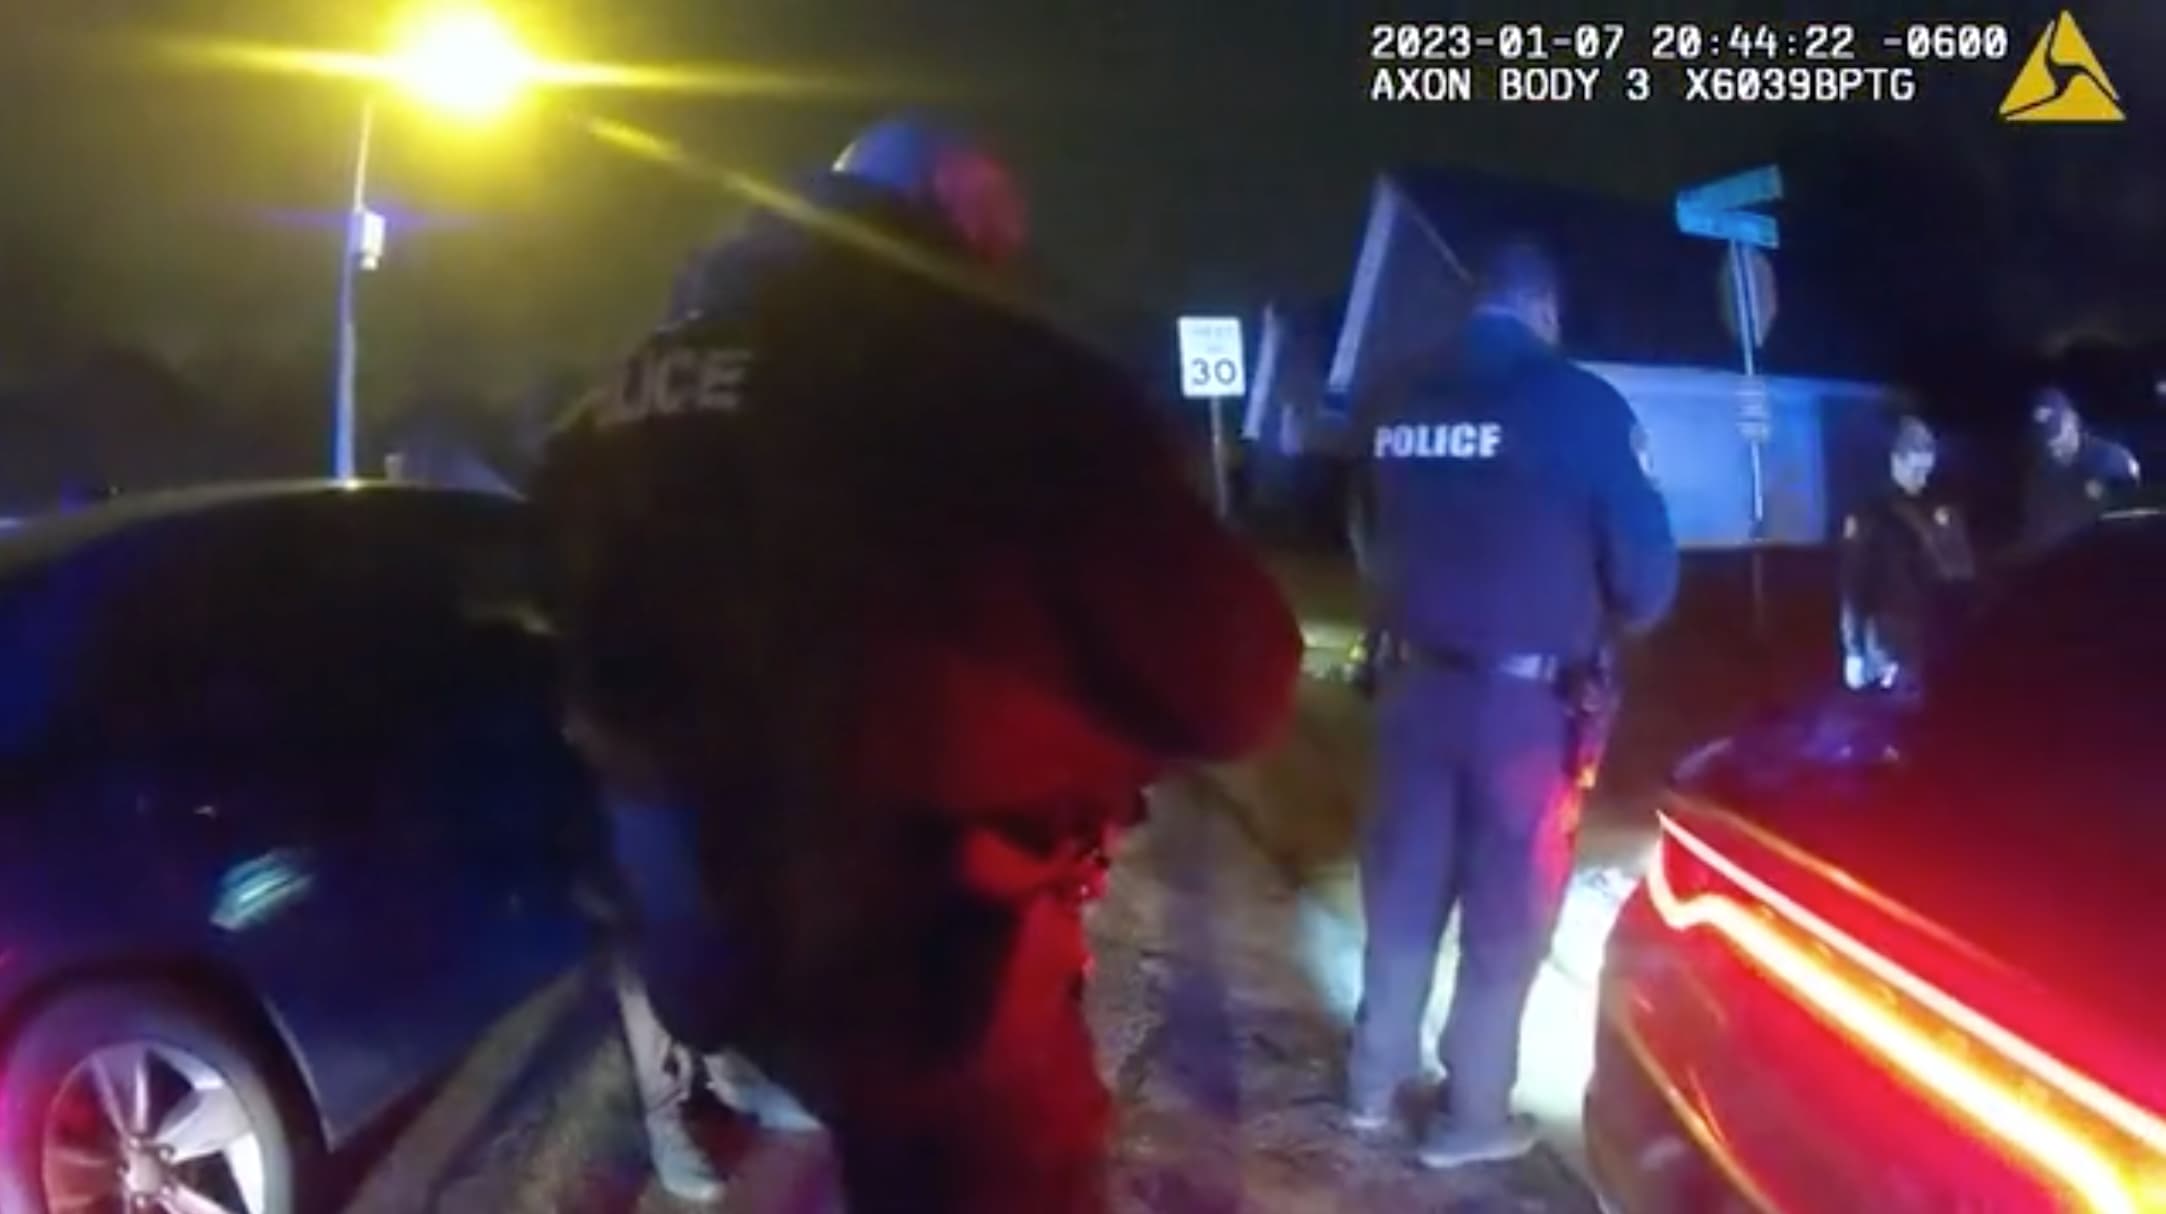 A screen grab of a police body-worn camera video capturing the aftermath of Tyre Nichols's arrest on Jan. 7, 2023.